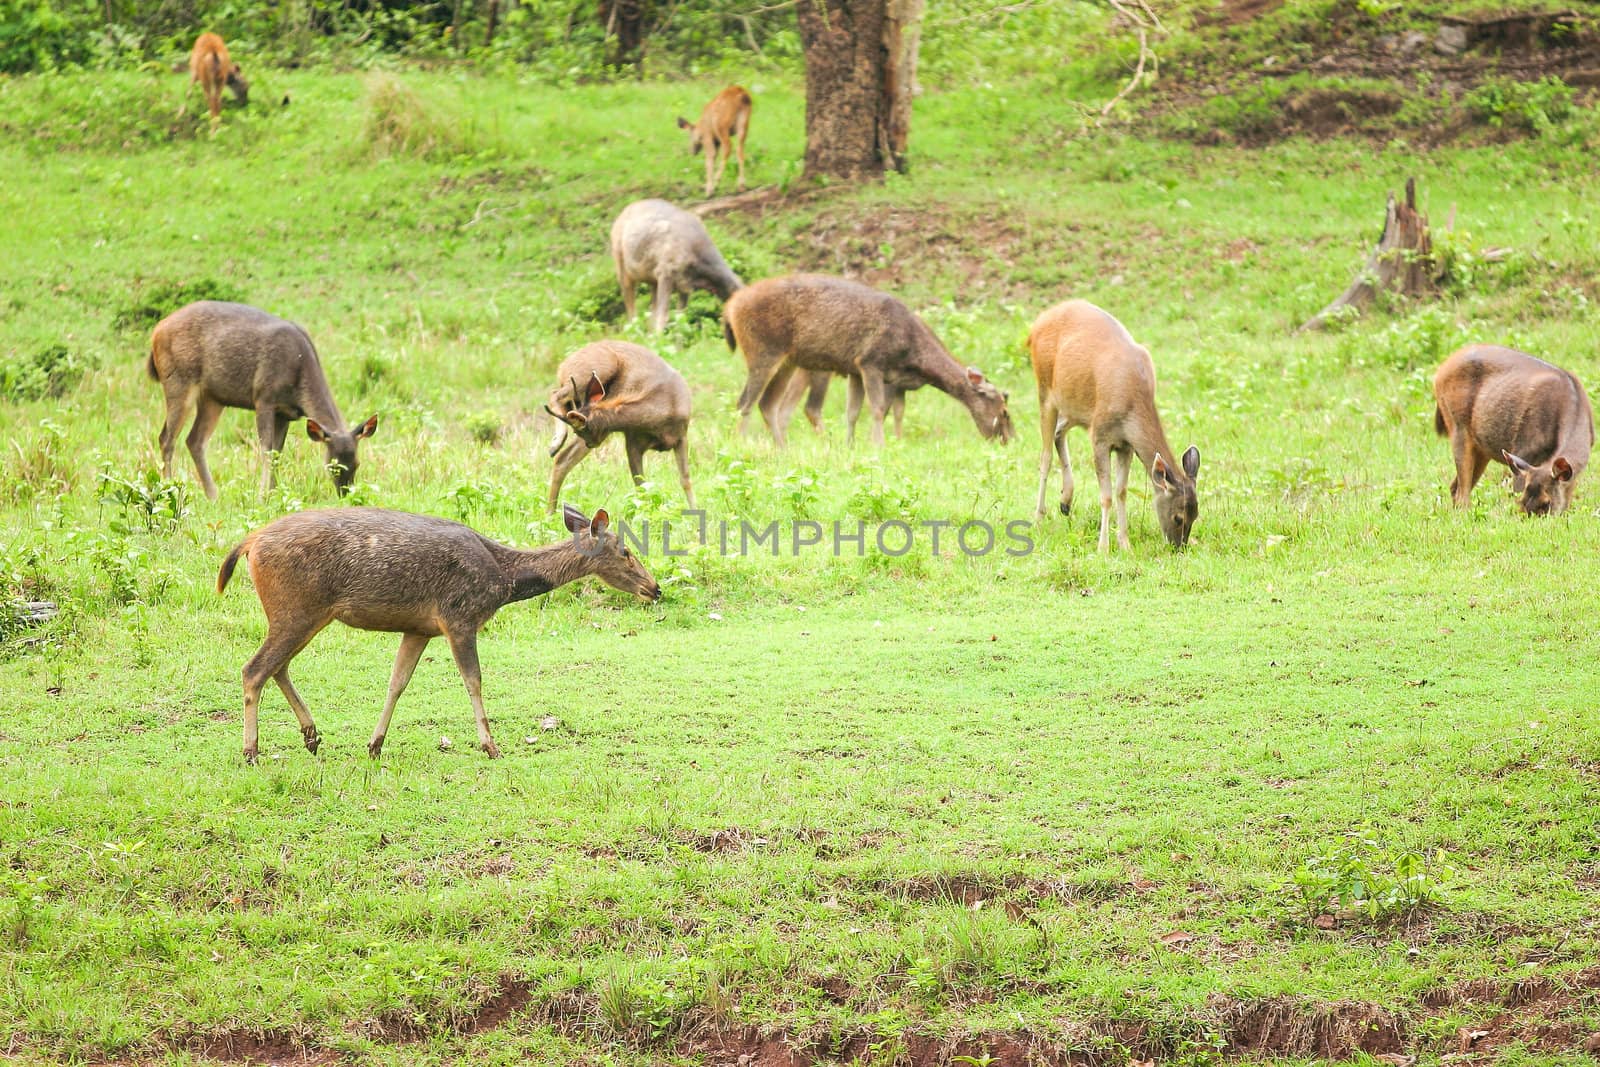 Deer herd in meadow scene at forest, Thailand.  by jame_j@homail.com